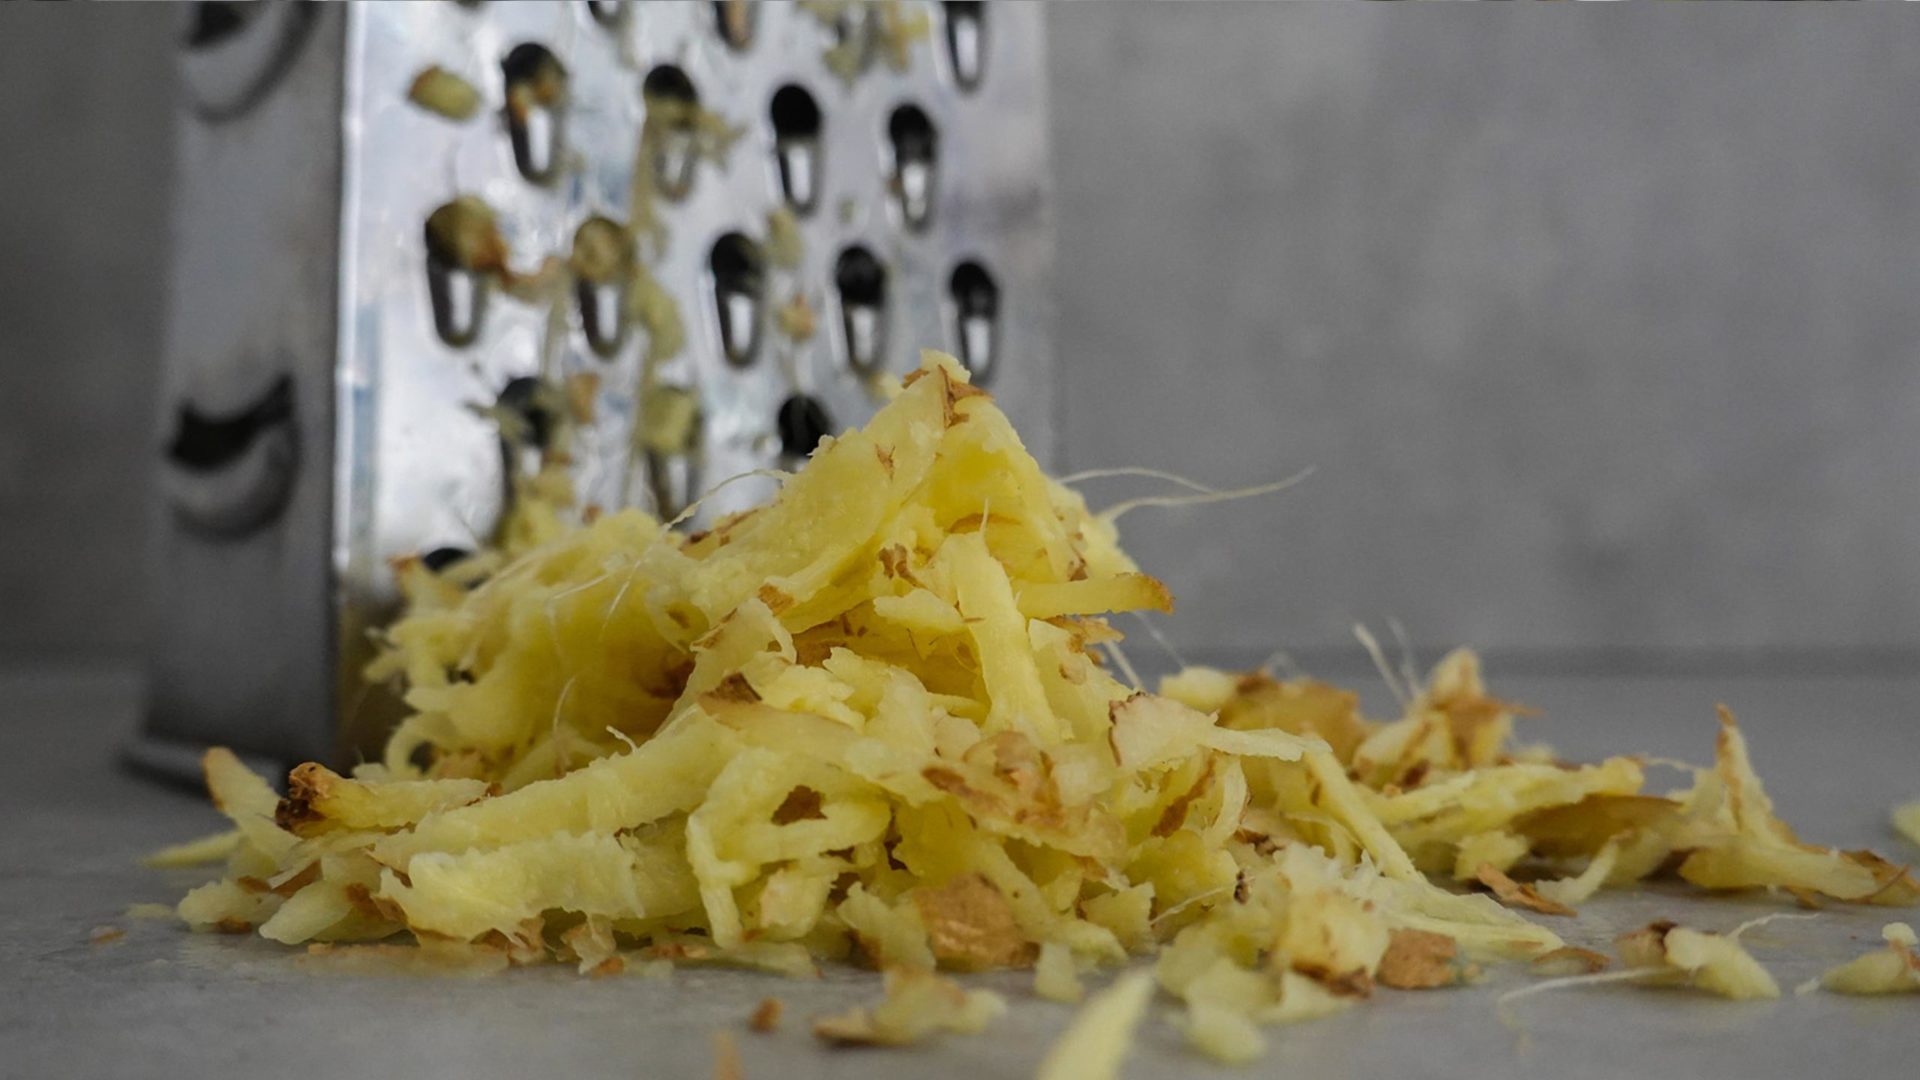 Grated ginger in front of a box grater